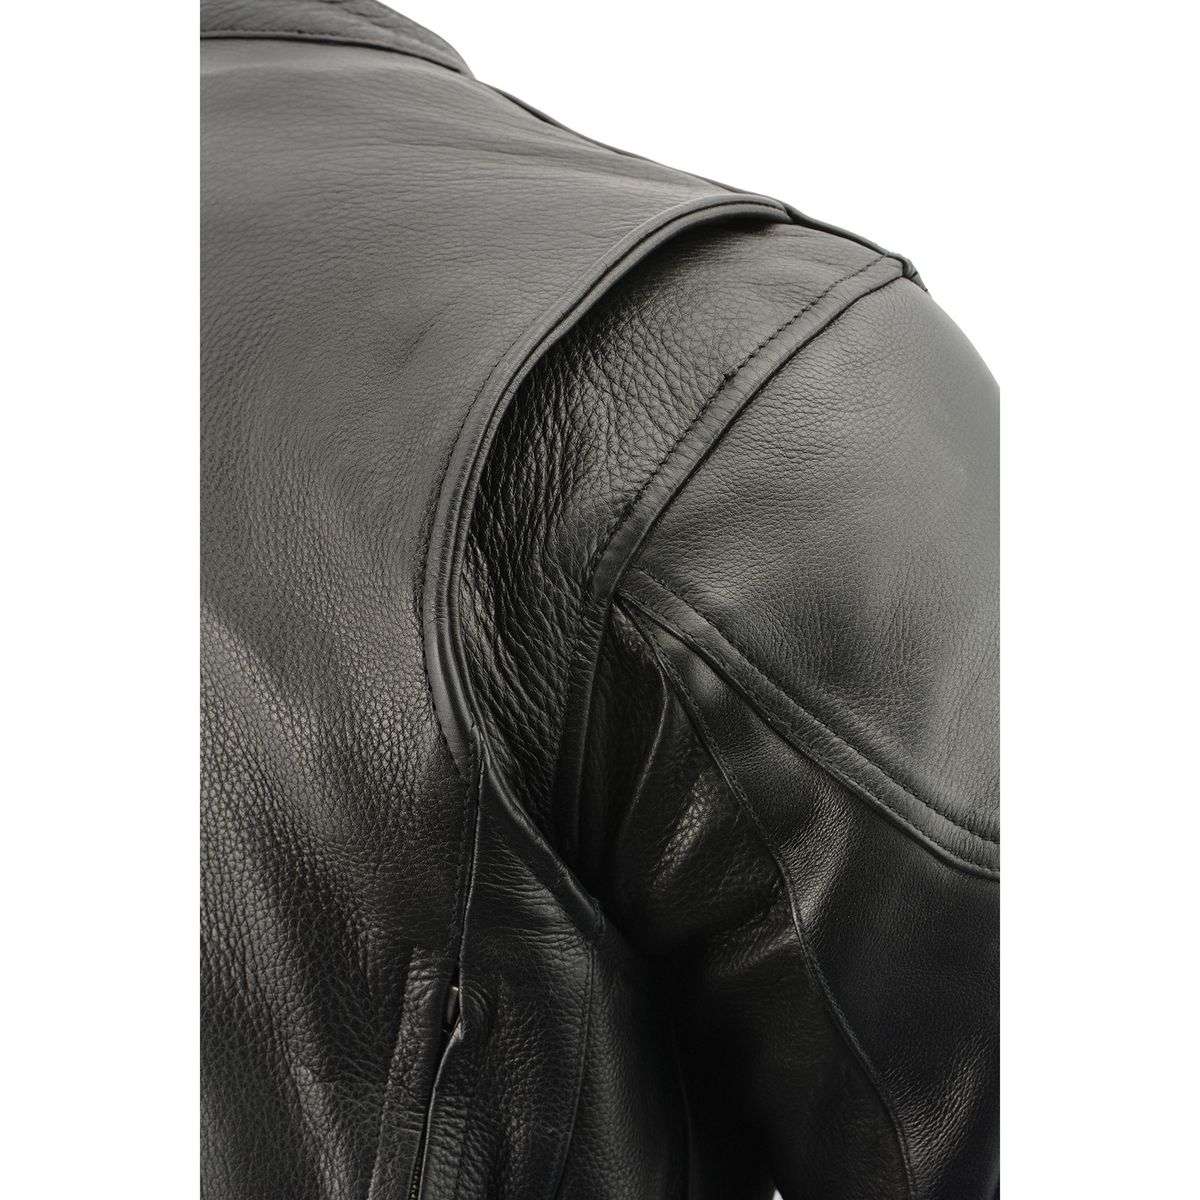 Men's Tall Sizes 'Scooter' Black Vented Leather Jacket with Side Laces